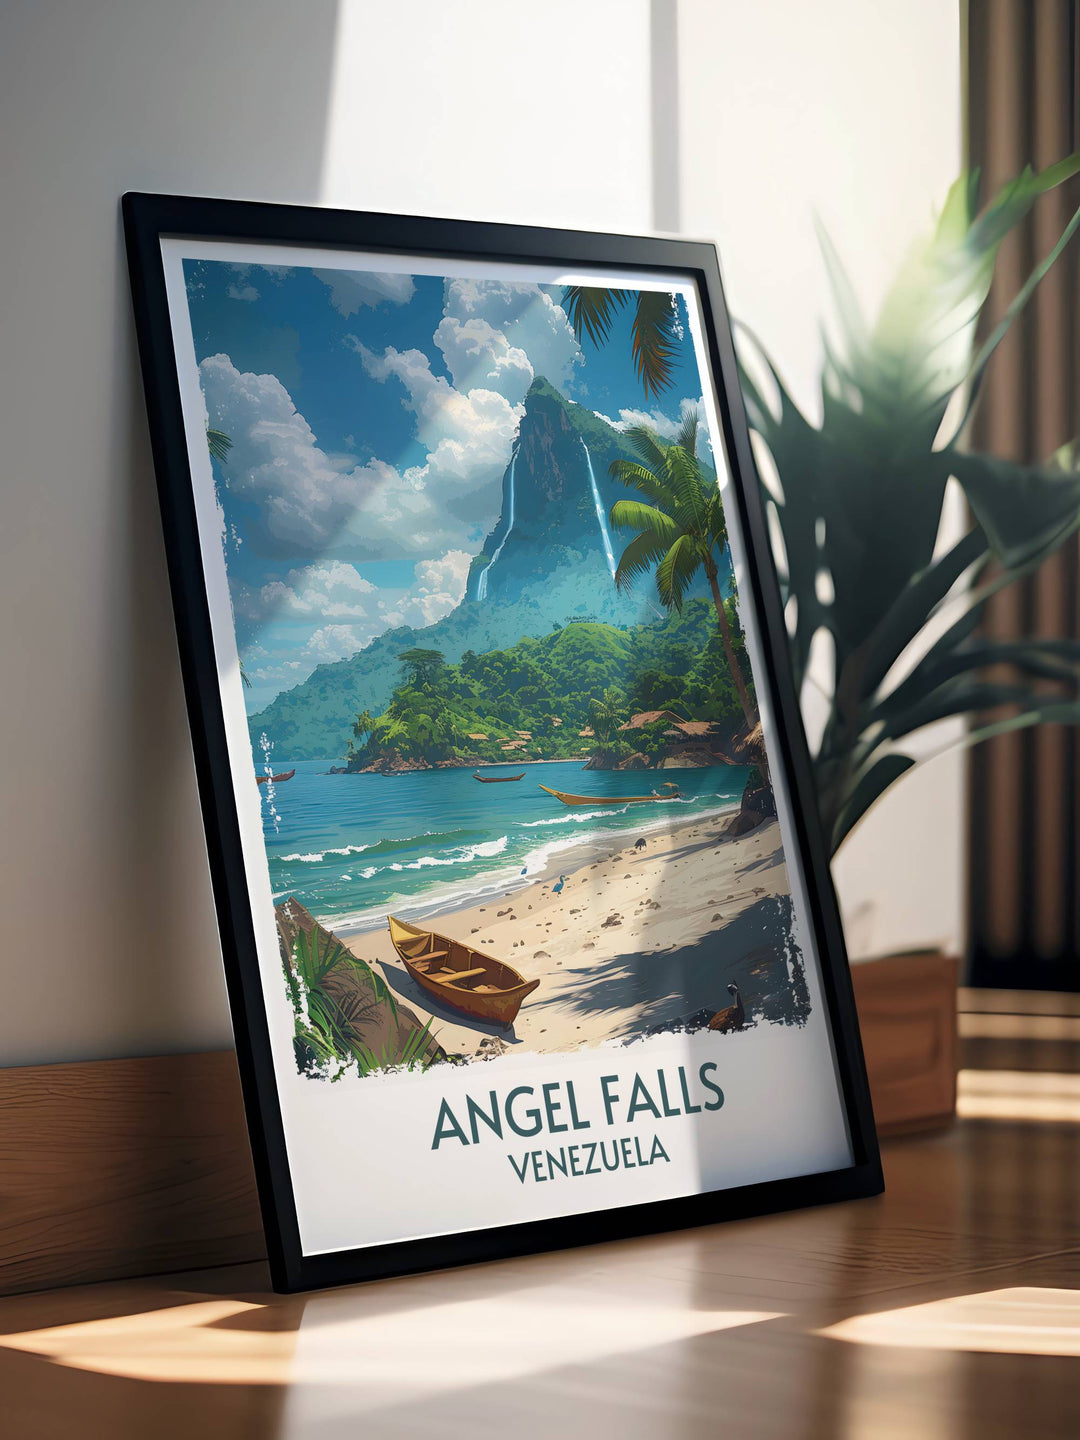 Immerse yourself in the lush landscapes of Angel Falls Canaima National Park with this beautifully crafted artwork, sure to inspire adventure.